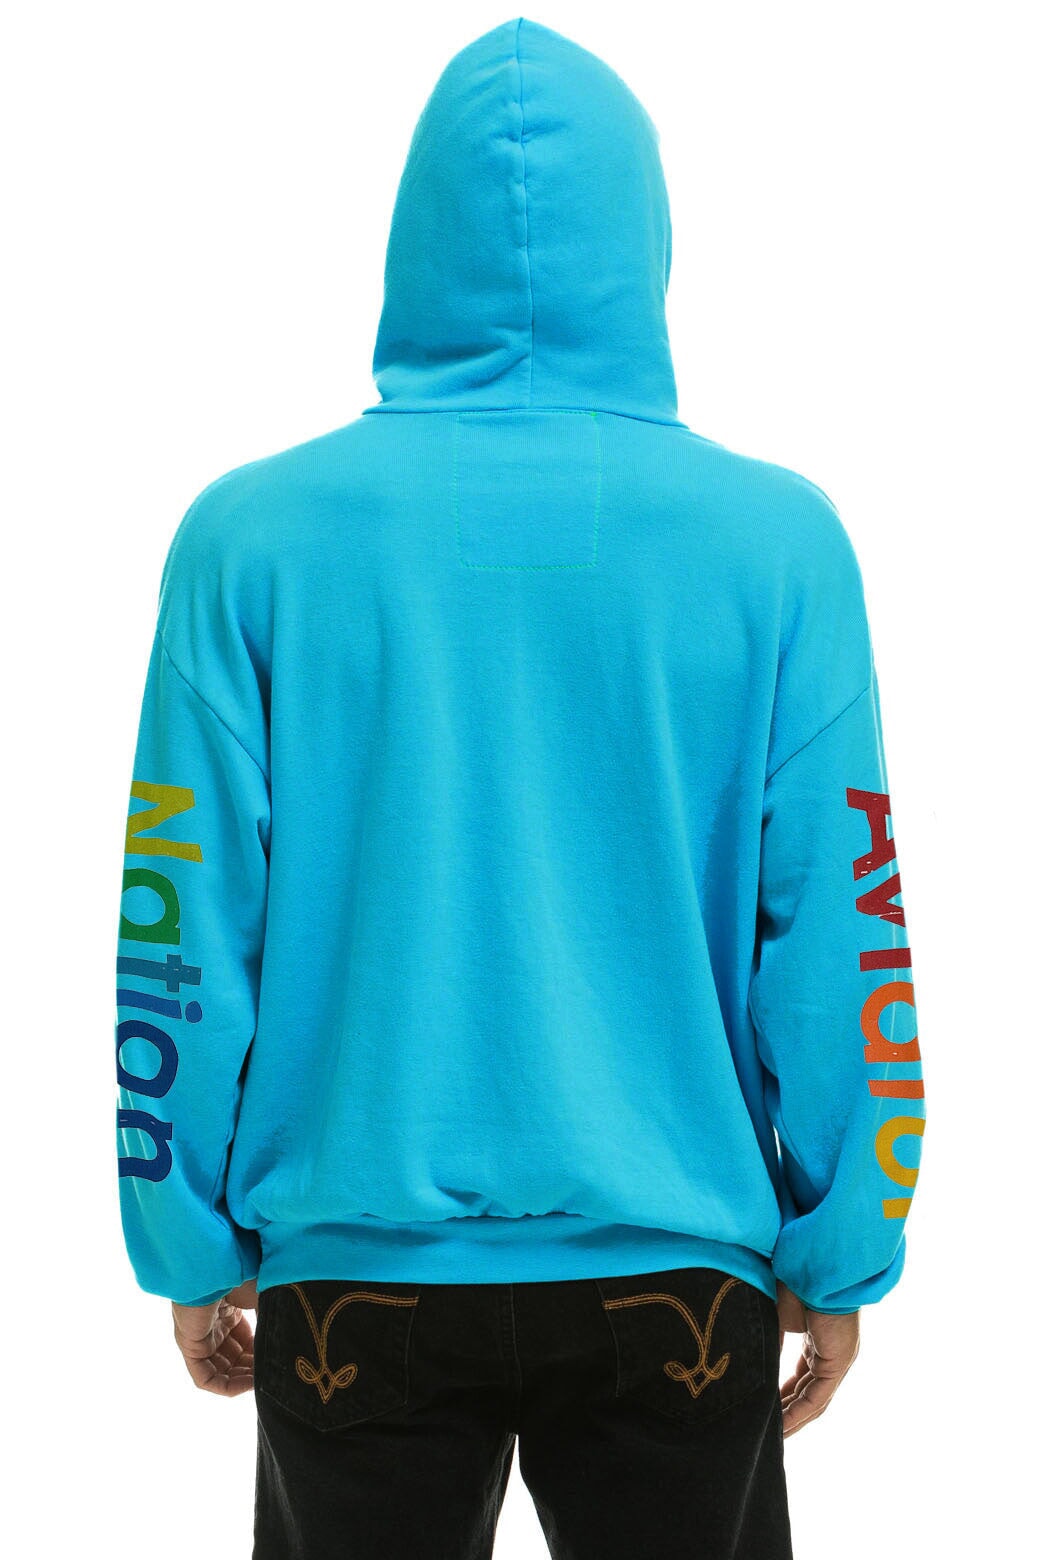 AVIATOR NATION VAIL RELAXED PULLOVER HOODIE - NEON BLUE Hoodie Aviator Nation 